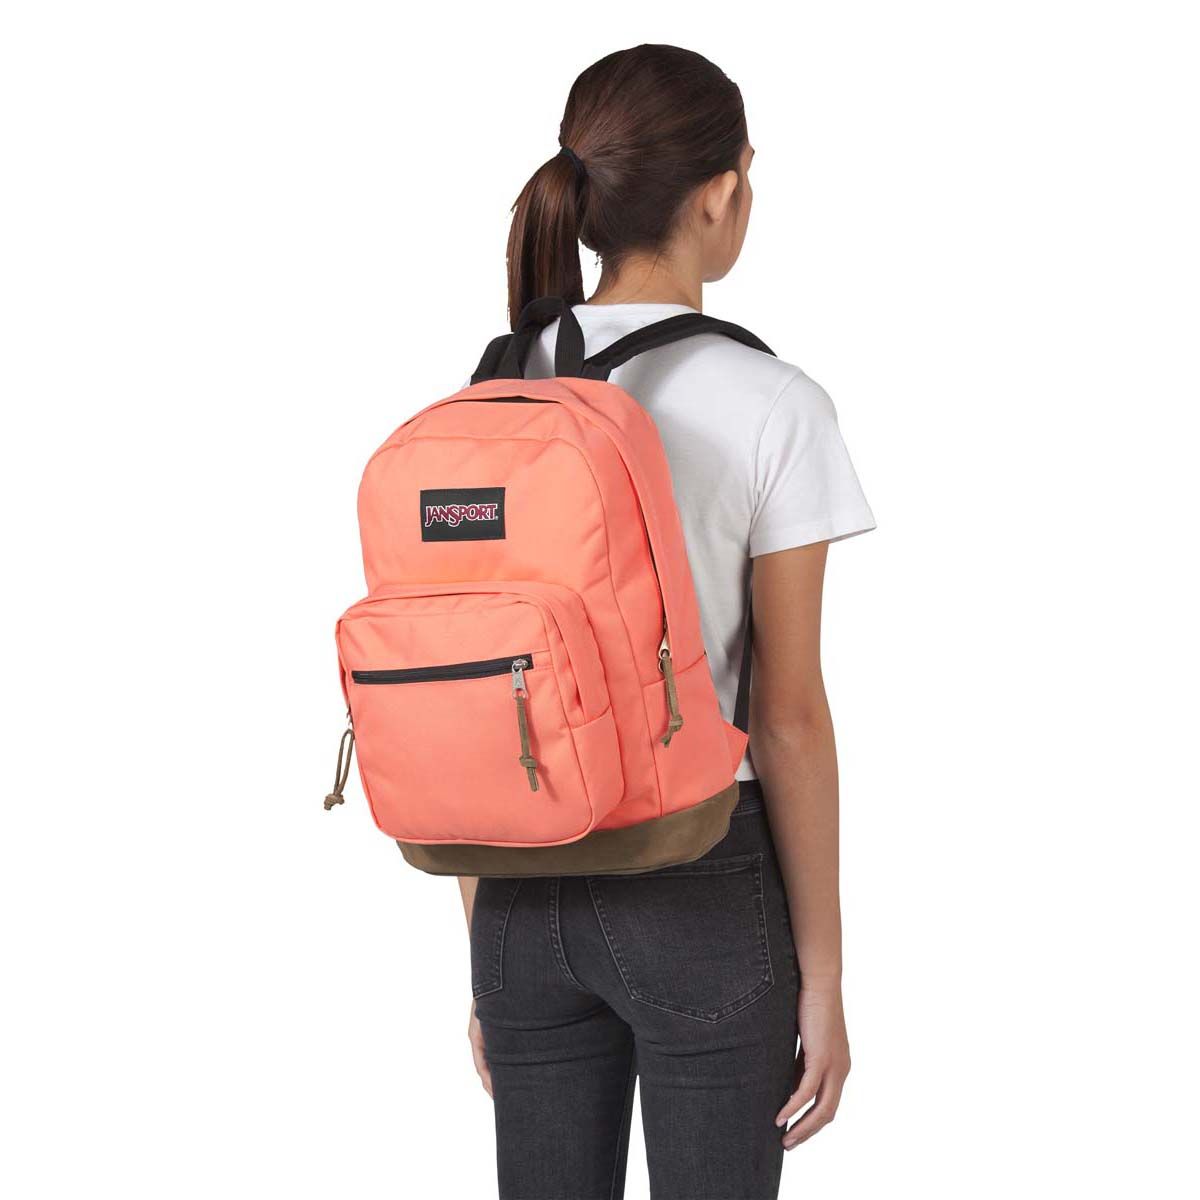 Right Fade Backpack